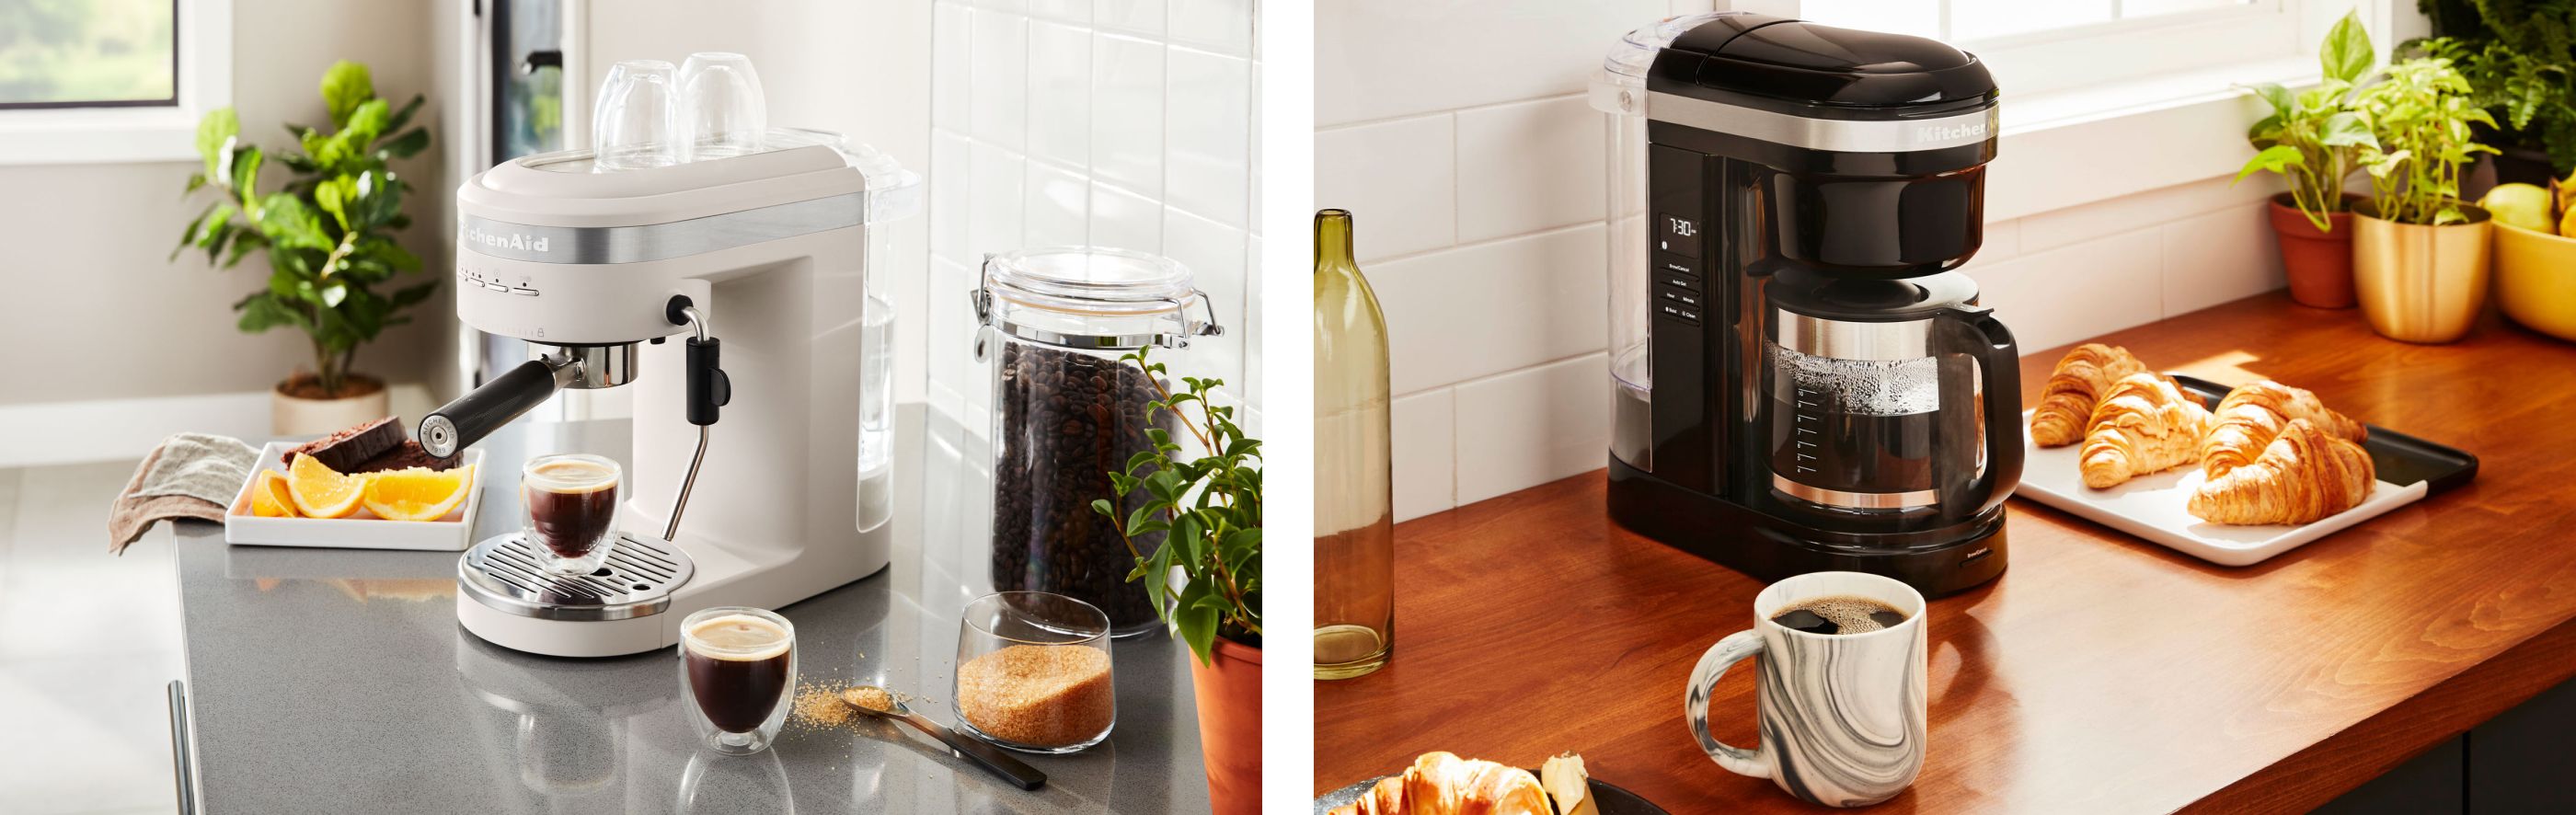 An espresso machine next to a coffee maker in different kitchens